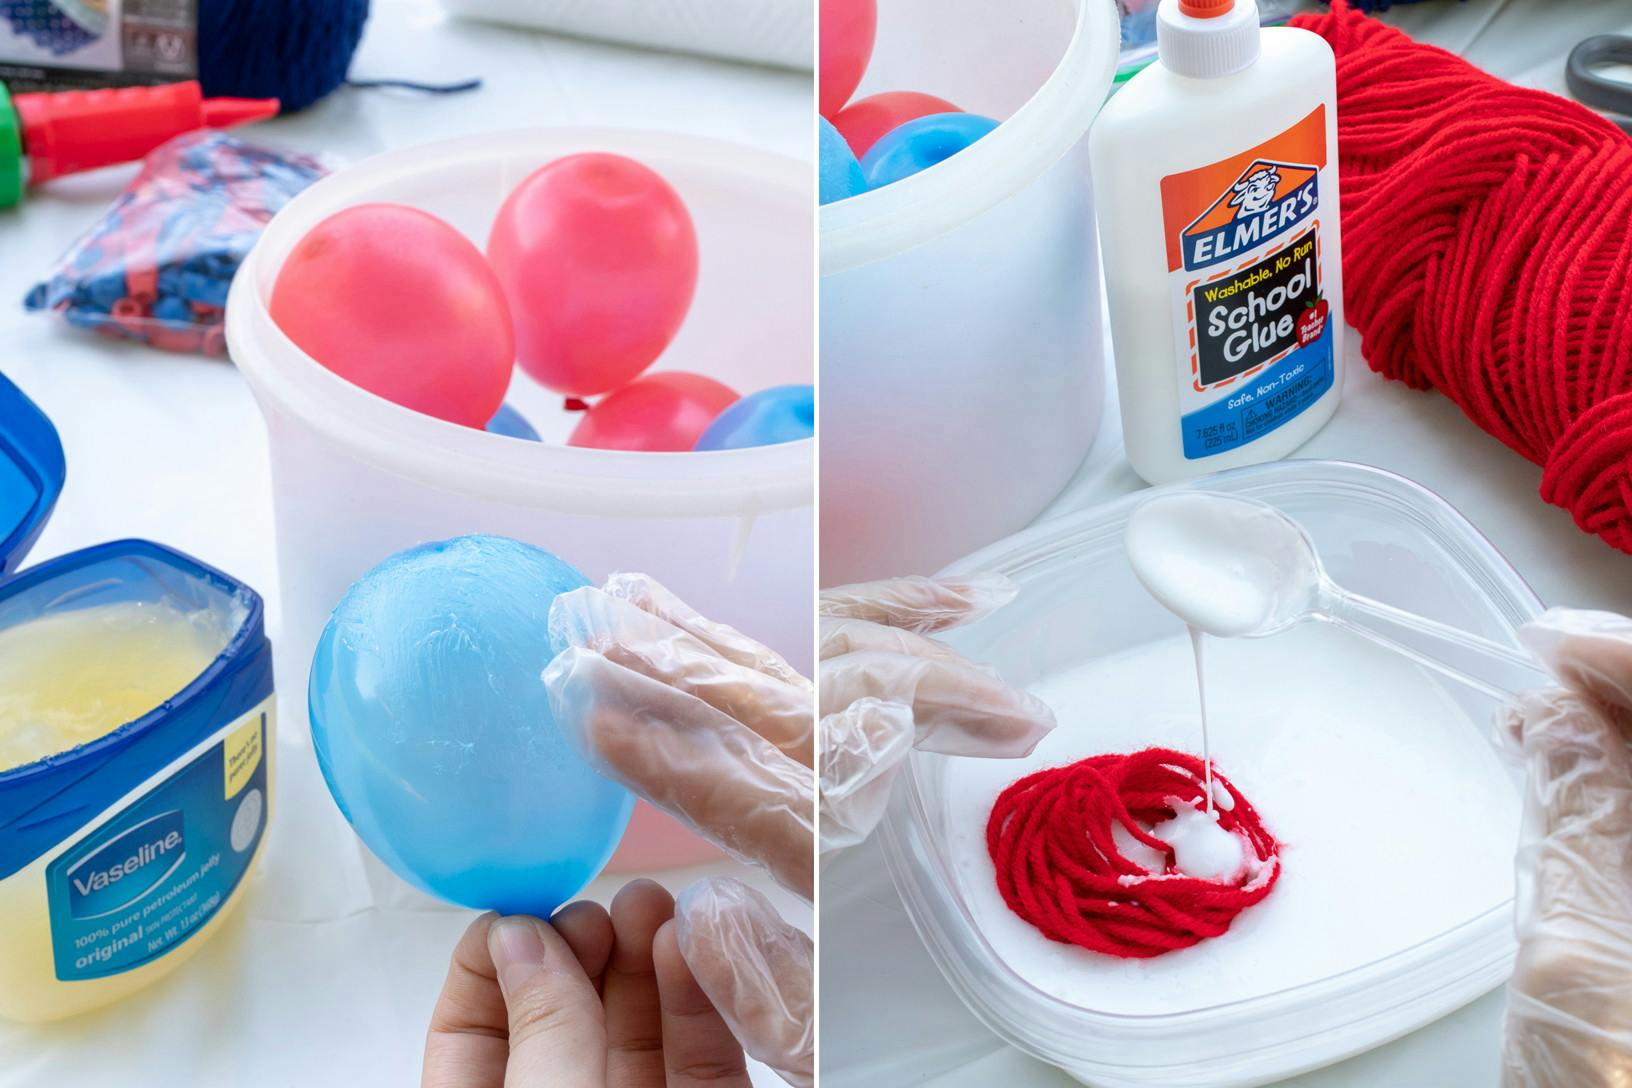 A person's gloved hand applying Vaseline to a small, inflated balloon and soaking some red yarn in a container of Elmer's Glue.